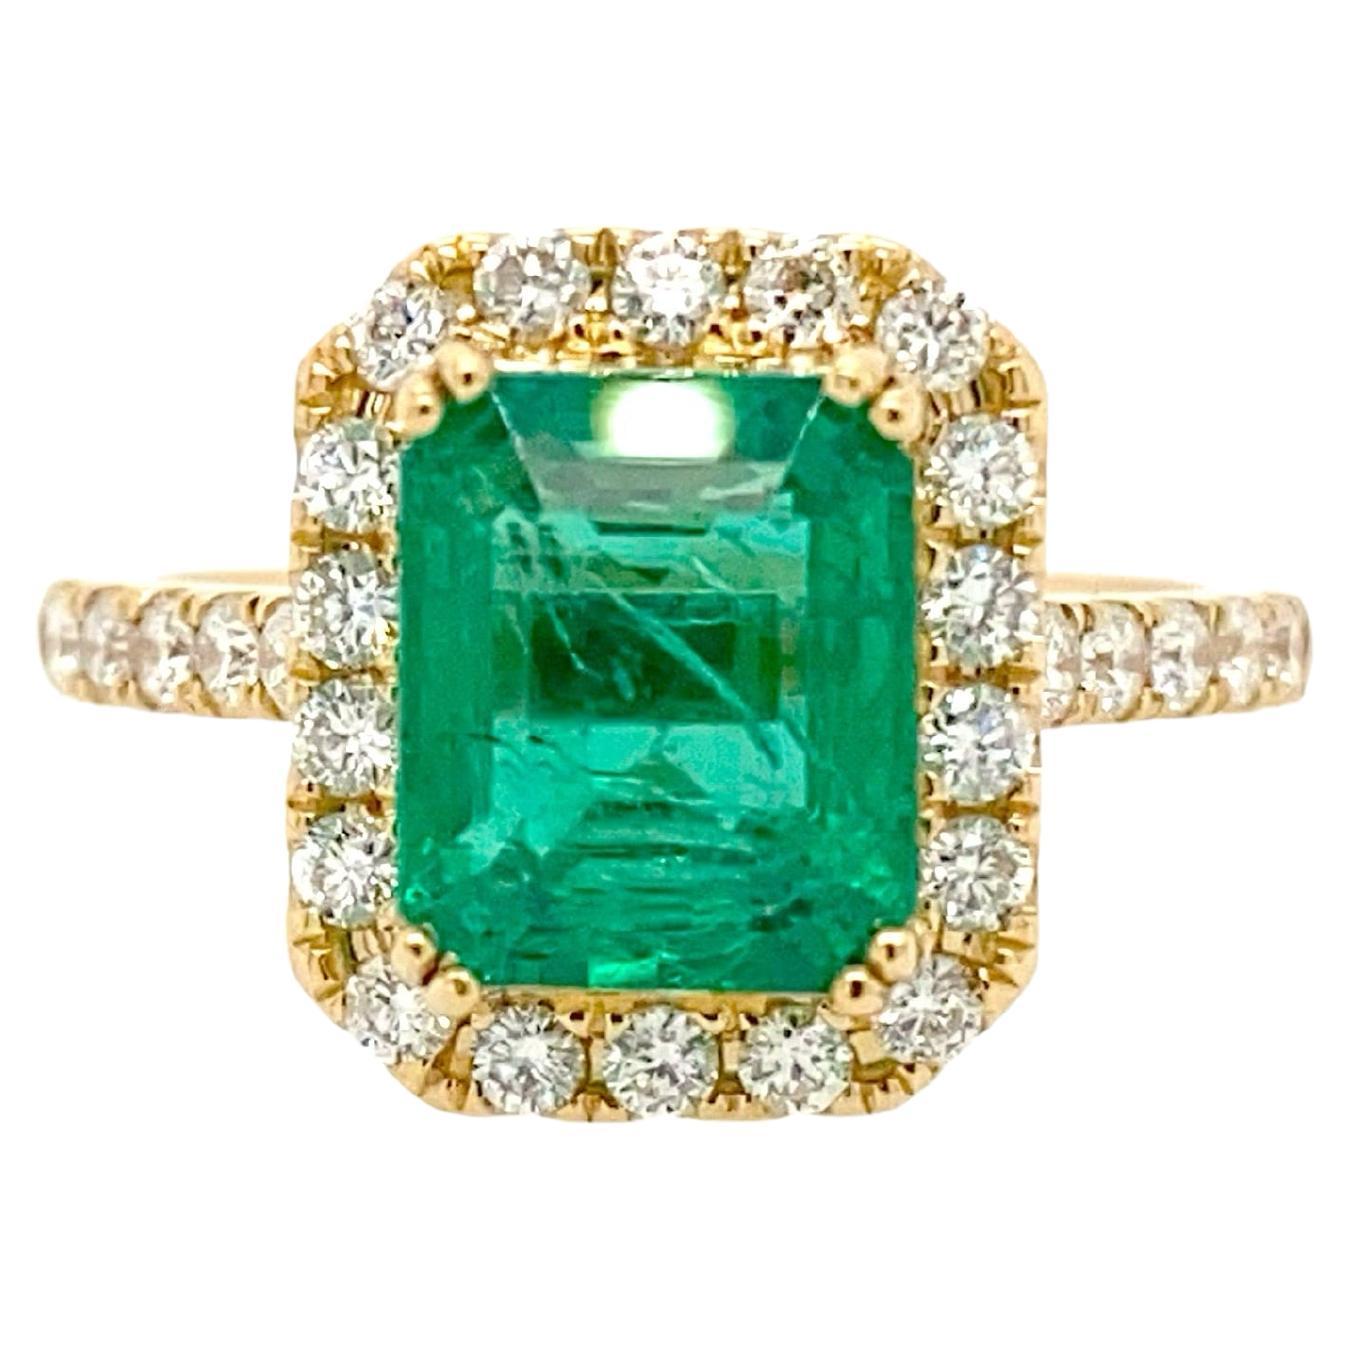 3 Carat Zambian Emerald And Diamond Halo Ring In 18k Yellow Gold For Sale